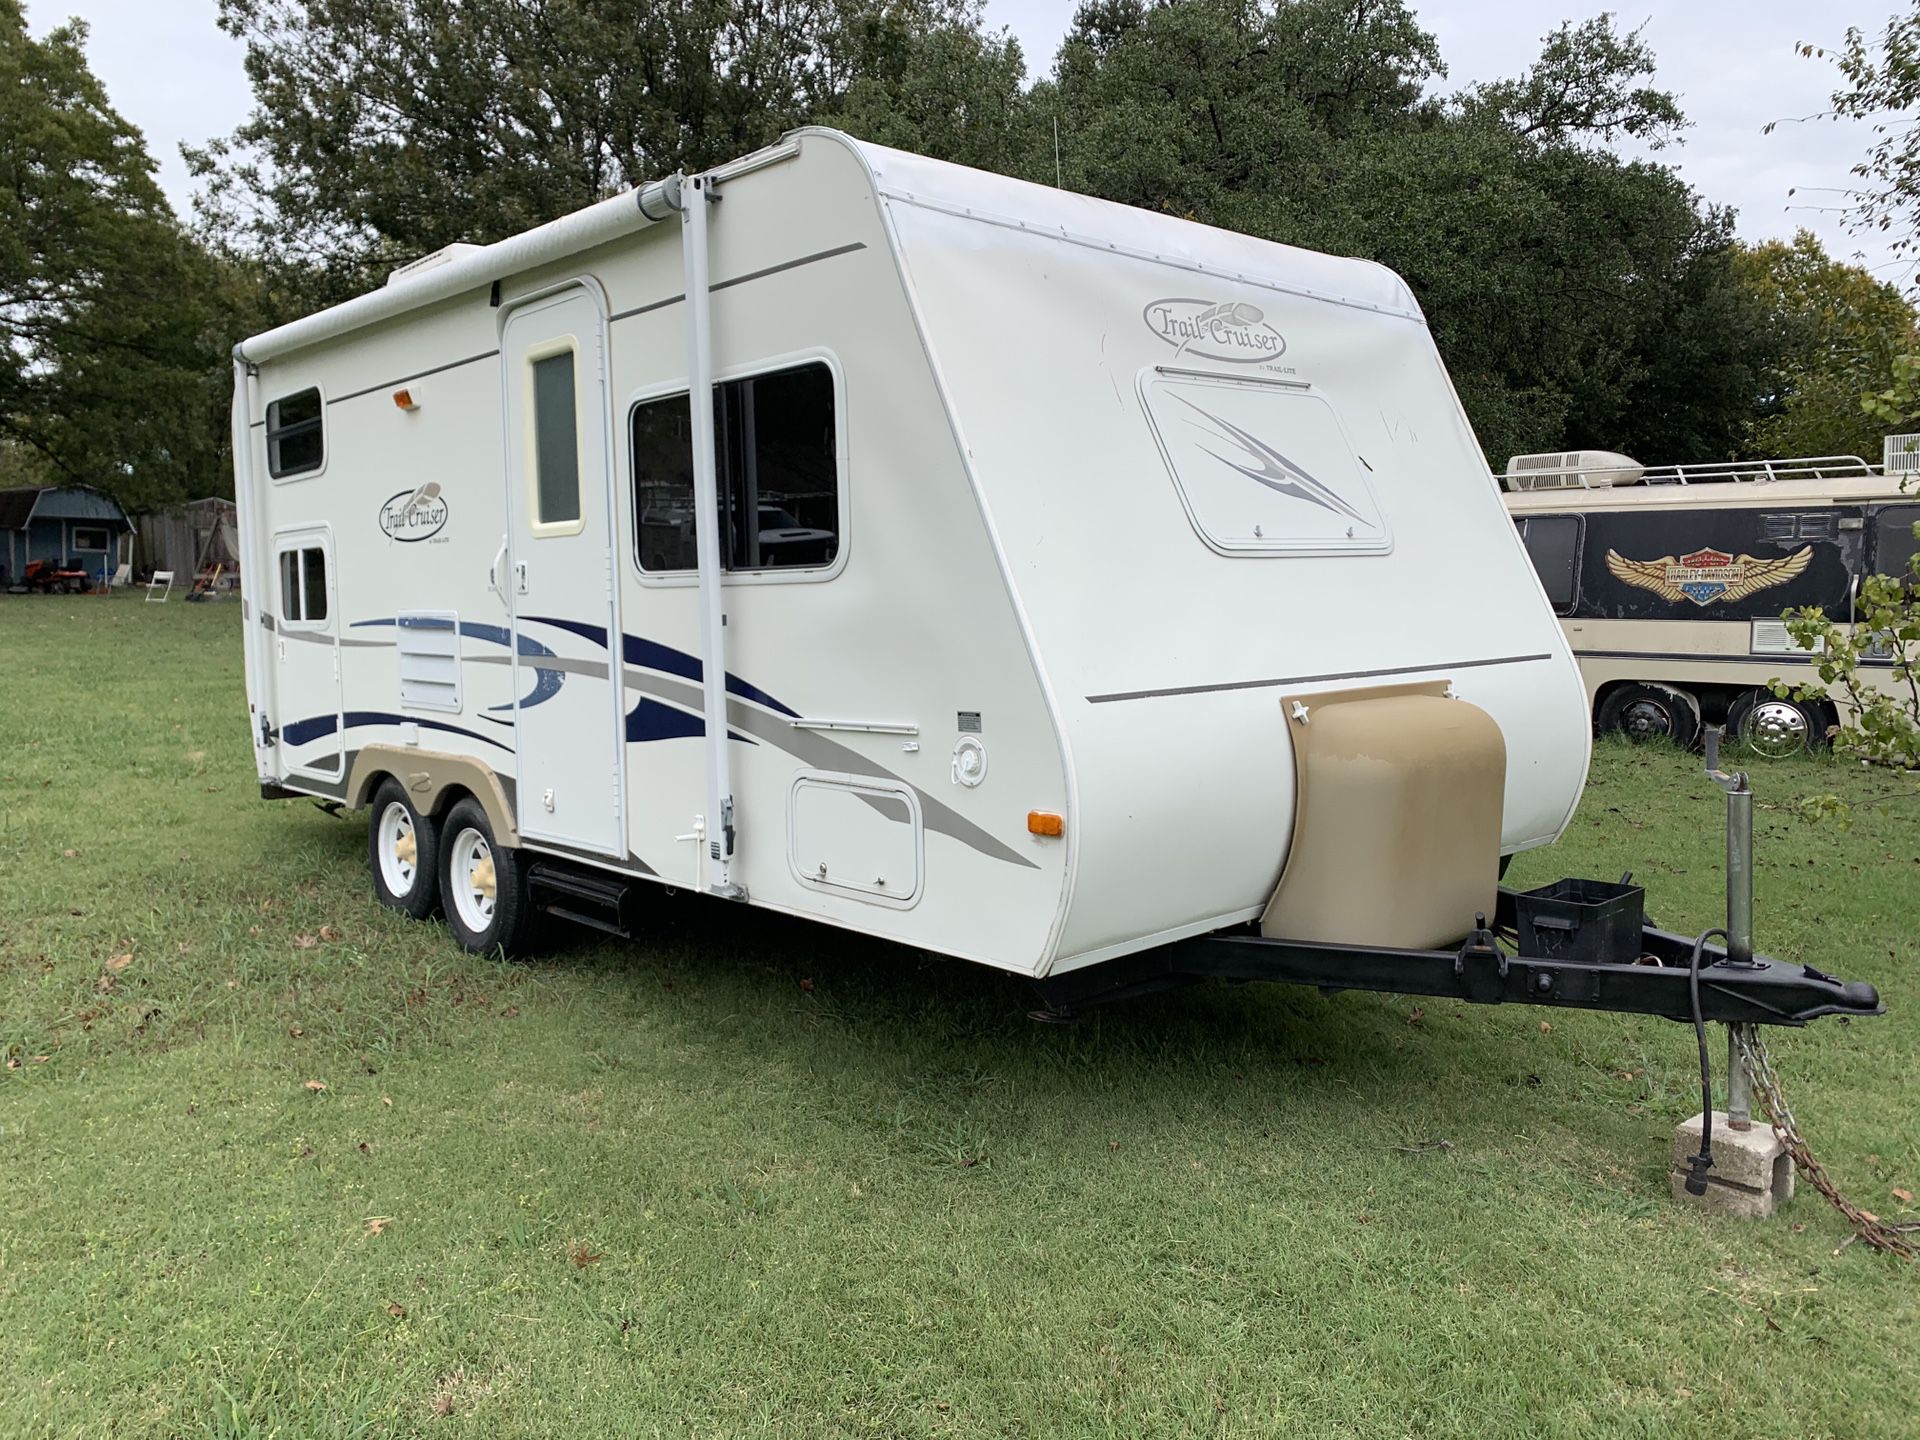 2006 trail cruiser 21ft ready for camping